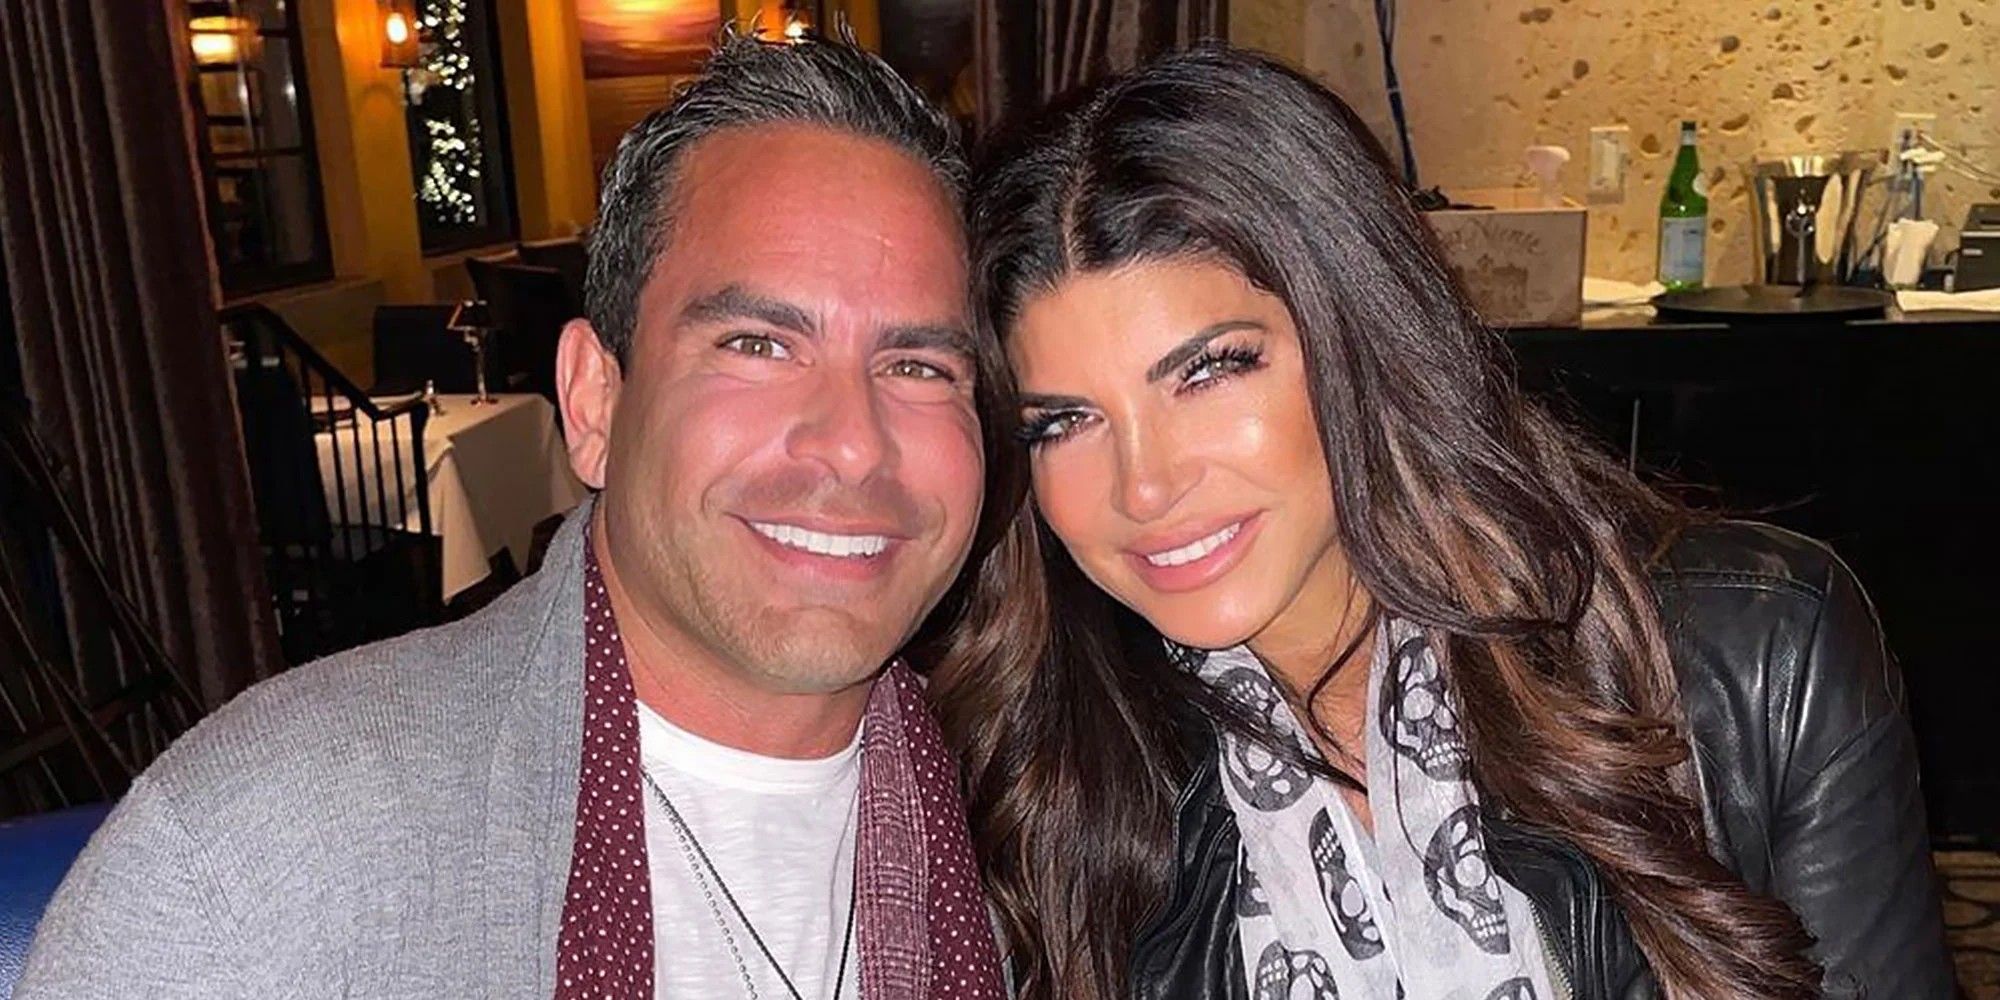 Teresa Guidice and Luis Ruelas from The Real Housewives of New Jersey